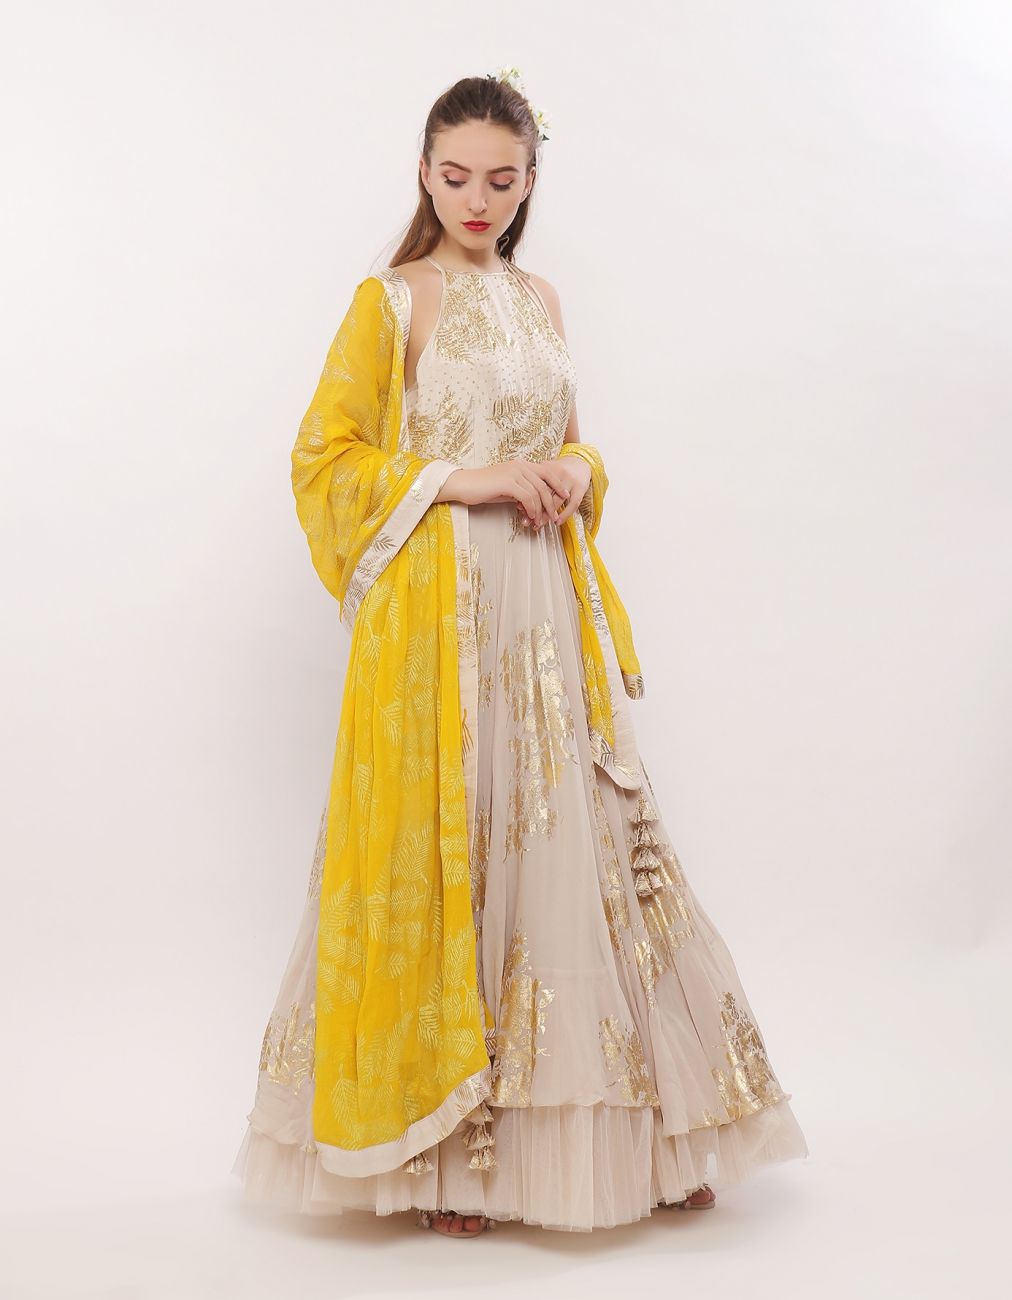 Ivory-Gold Leaf Motif Anarkali - Indian Clothing in Denver, CO, Aurora, CO, Boulder, CO, Fort Collins, CO, Colorado Springs, CO, Parker, CO, Highlands Ranch, CO, Cherry Creek, CO, Centennial, CO, and Longmont, CO. Nationwide shipping USA - India Fashion X